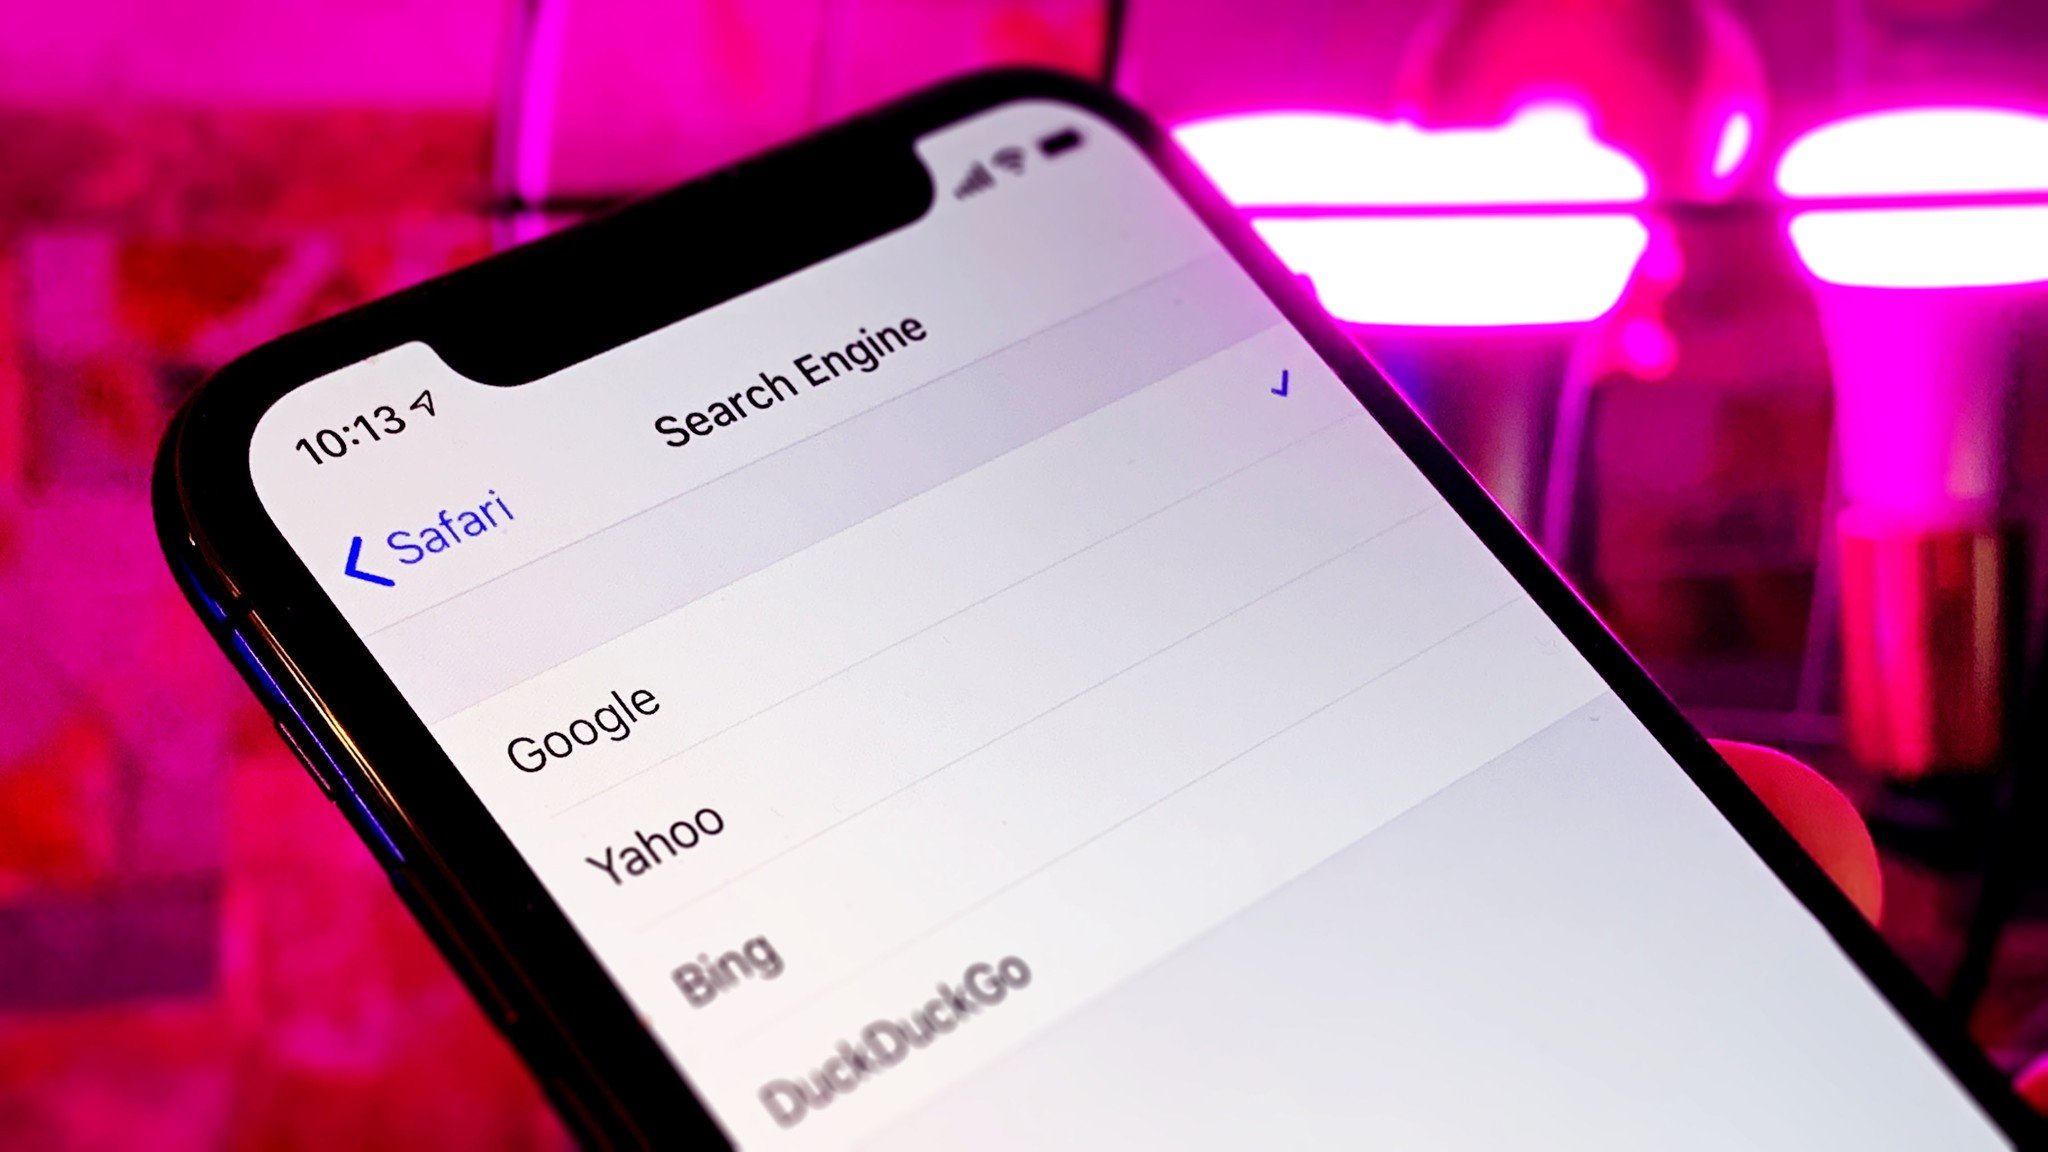 iPhone XS set Google as default search engine